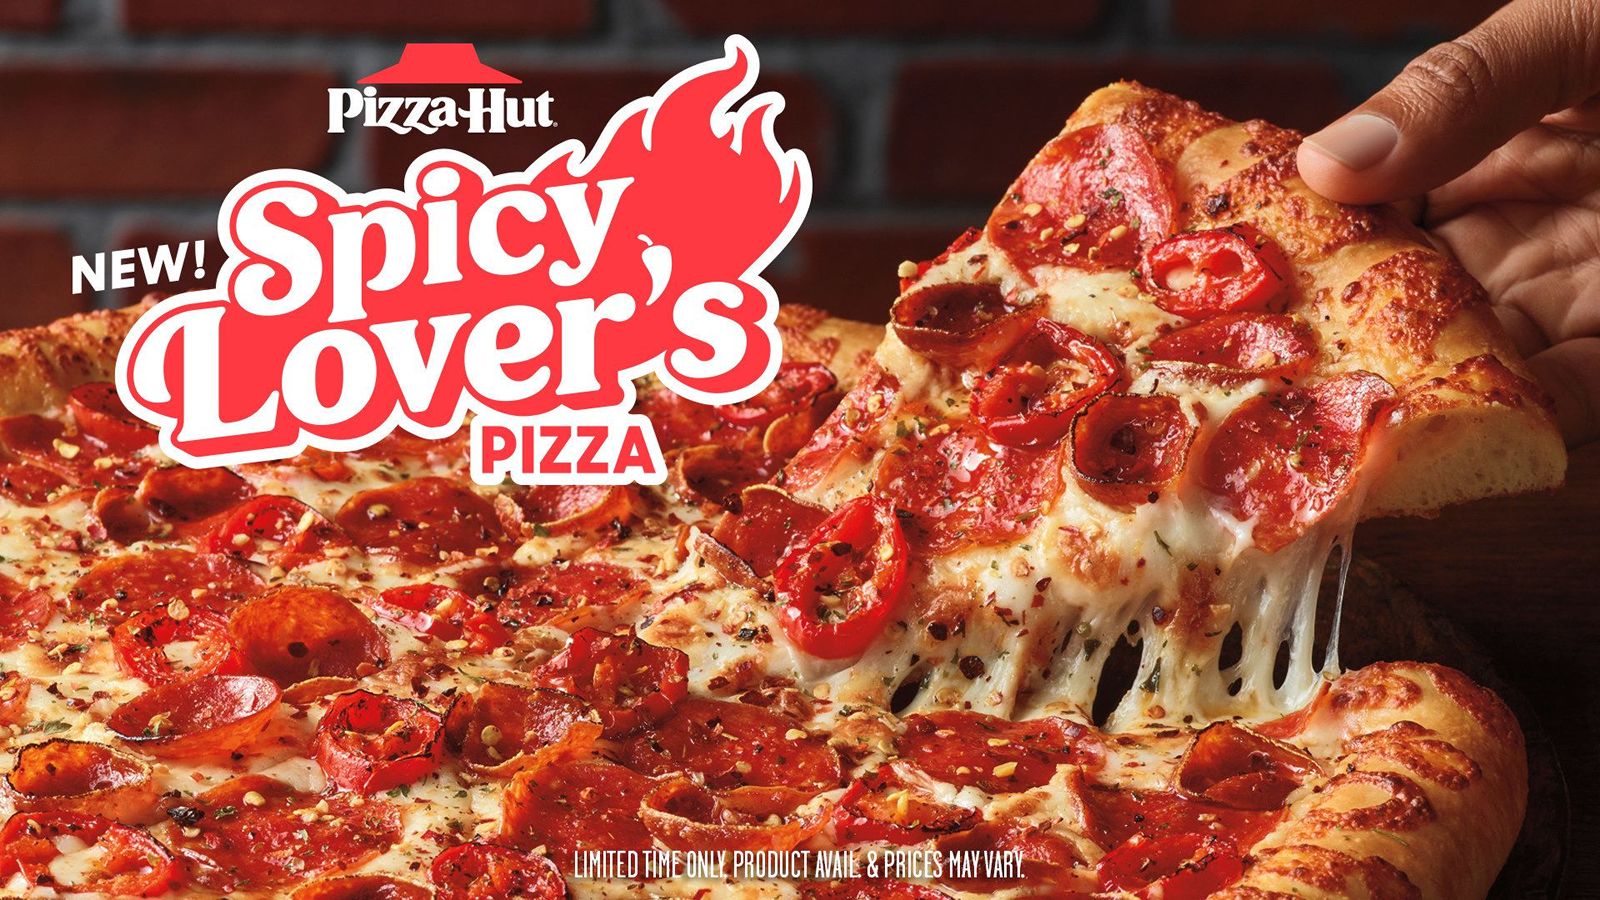 Comin' in Hot! Pizza Hut Launches New Spicy Lover's Pizza